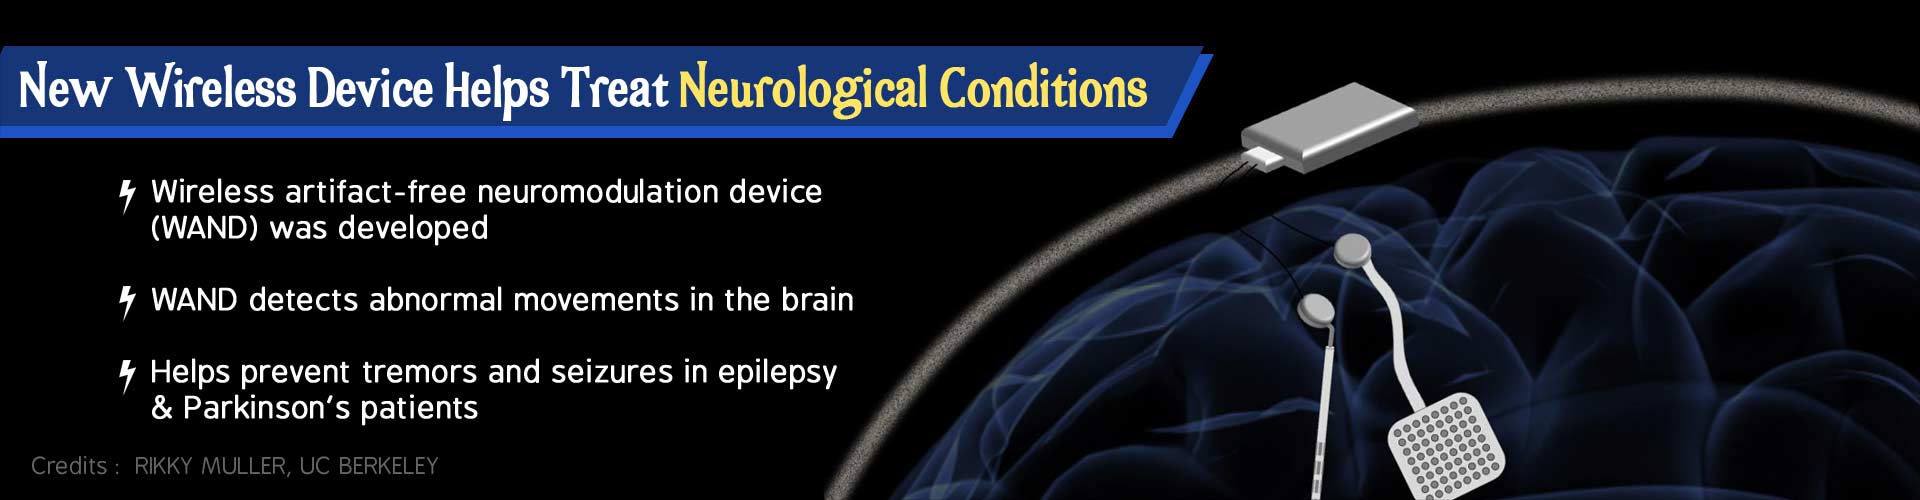 New wireless device helps treat neurological conditions. Wireless artifact-free neuromodulation device (WAND) was developed. WAND detects abnormal movements in the brain. Helps prevent tremors and seizures in epilepsy and Parkinson's patients.